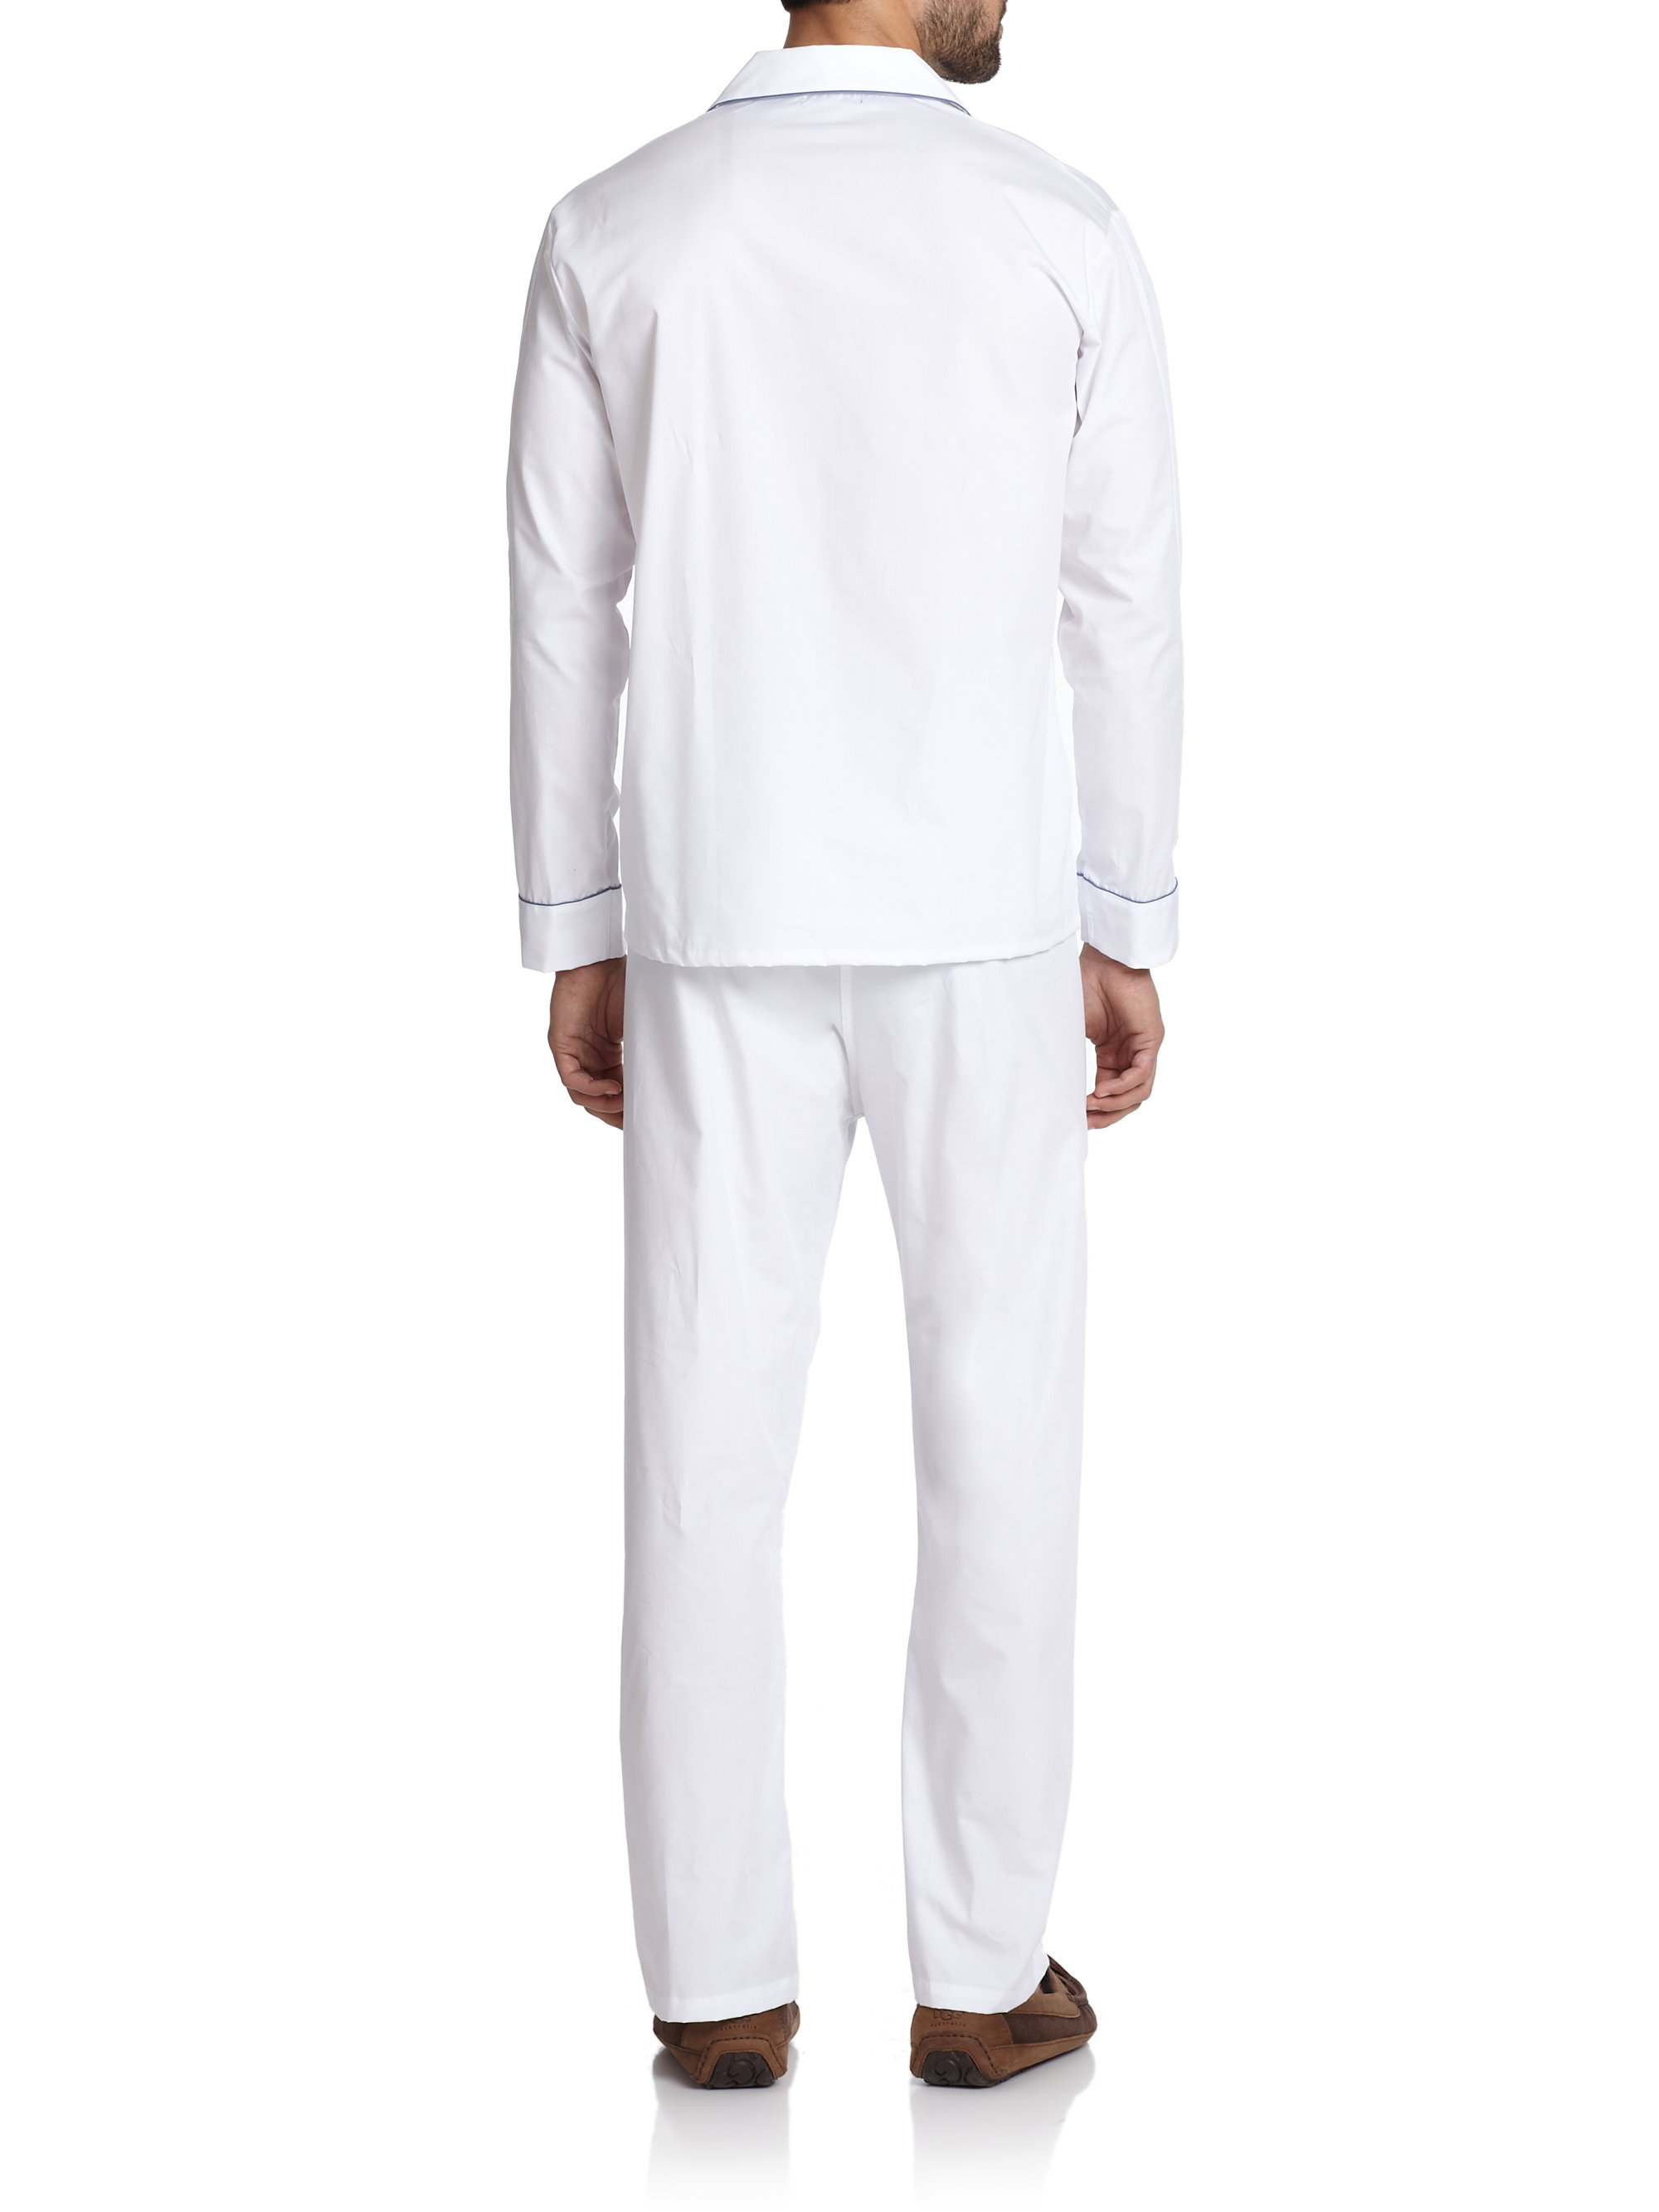 Saks Fifth Avenue Piped Cotton Pajama Set in White for Men - Lyst